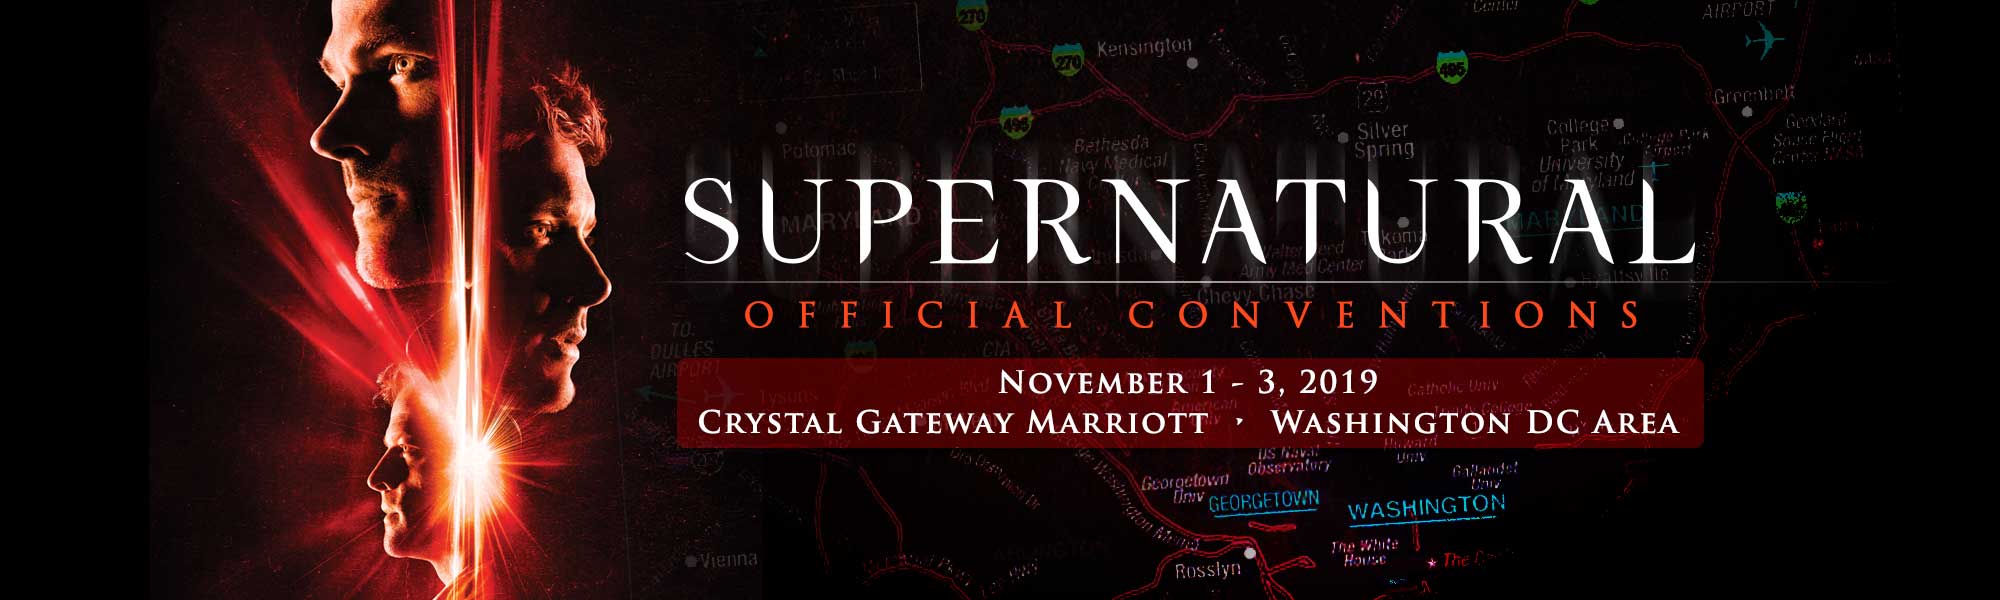 Creation Entertainment's Supernatural Offical Convention in the